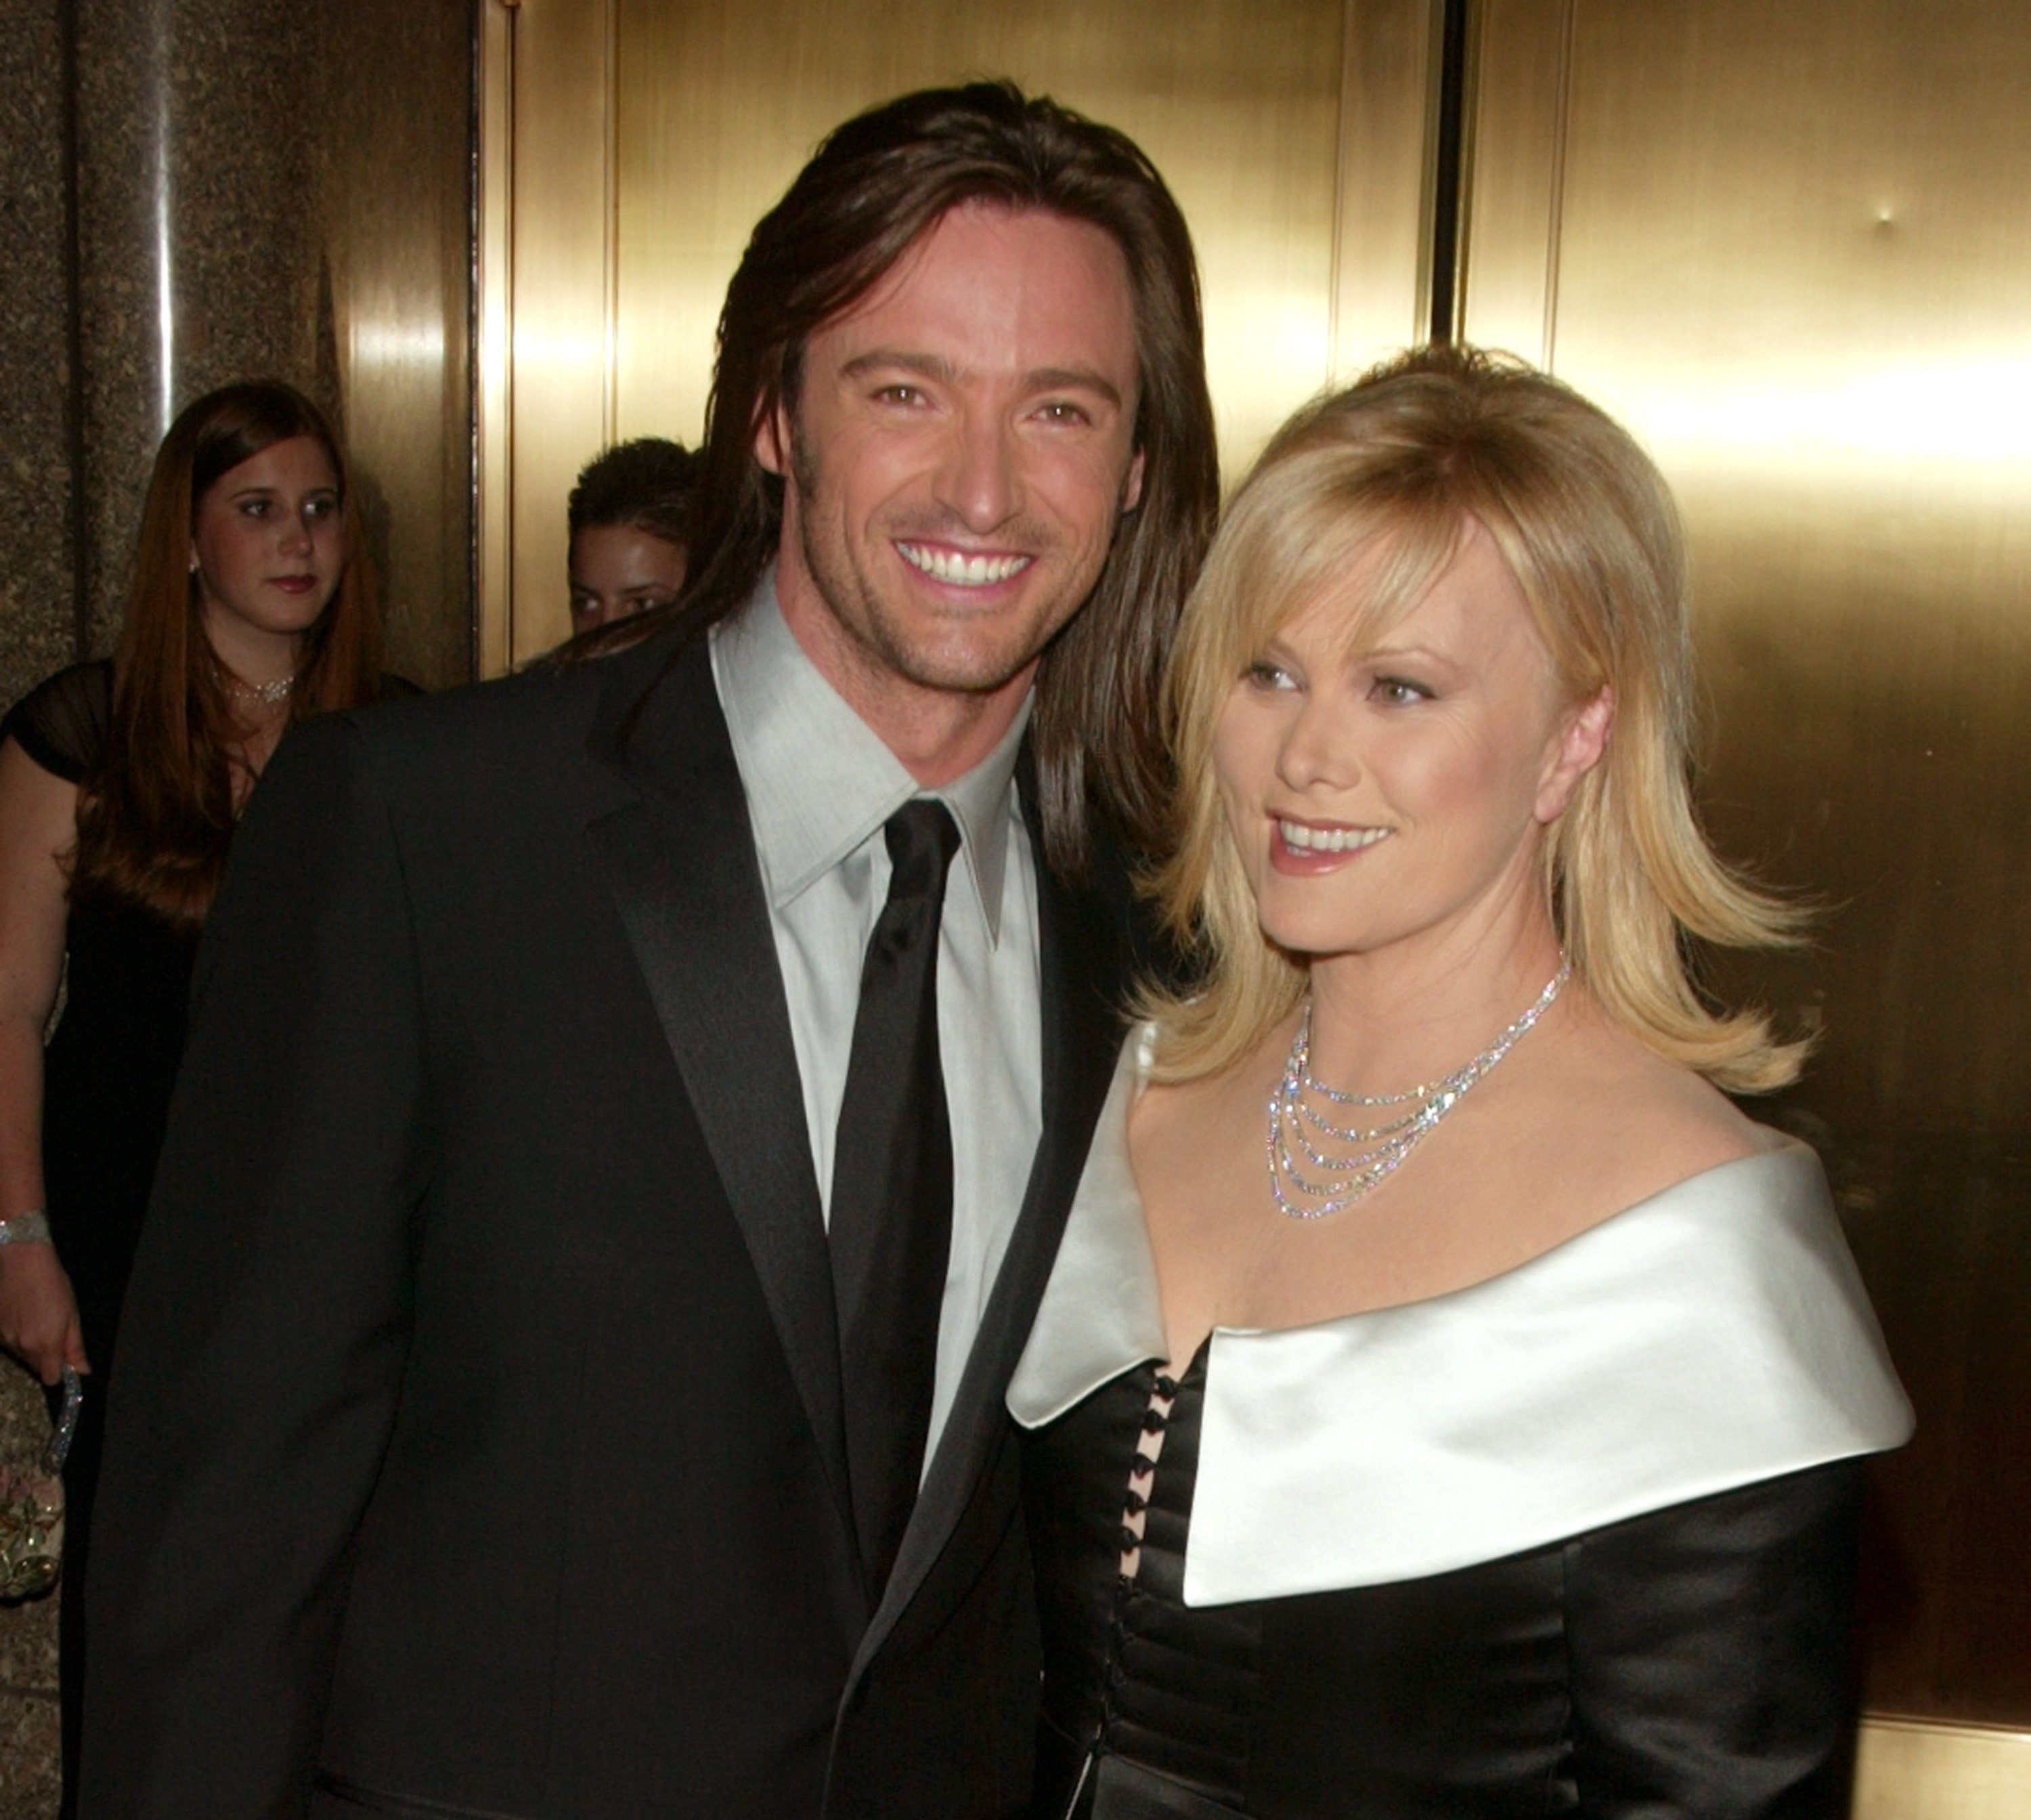 Hugh Jackman and wife Deborra-Lee Furness during the 2003 Tony Awards at Radio City Music Hall in New York City, New York | Source: Getty Images